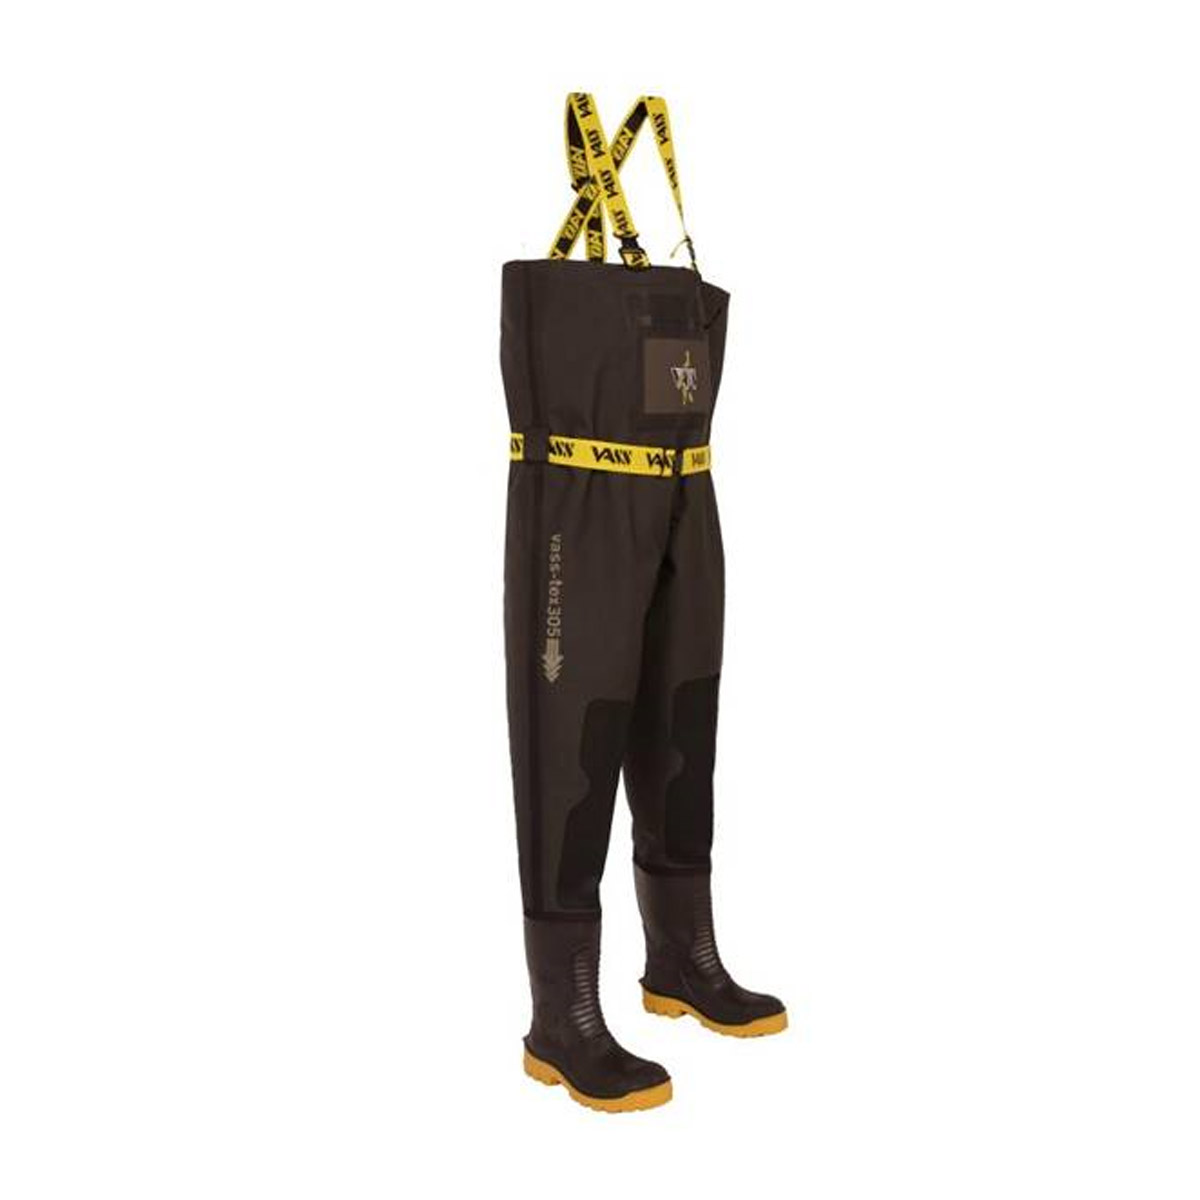 Vass Breathable Wader -  12-47 -  9-43 -  8-42 -  10-44/45 -  11-46